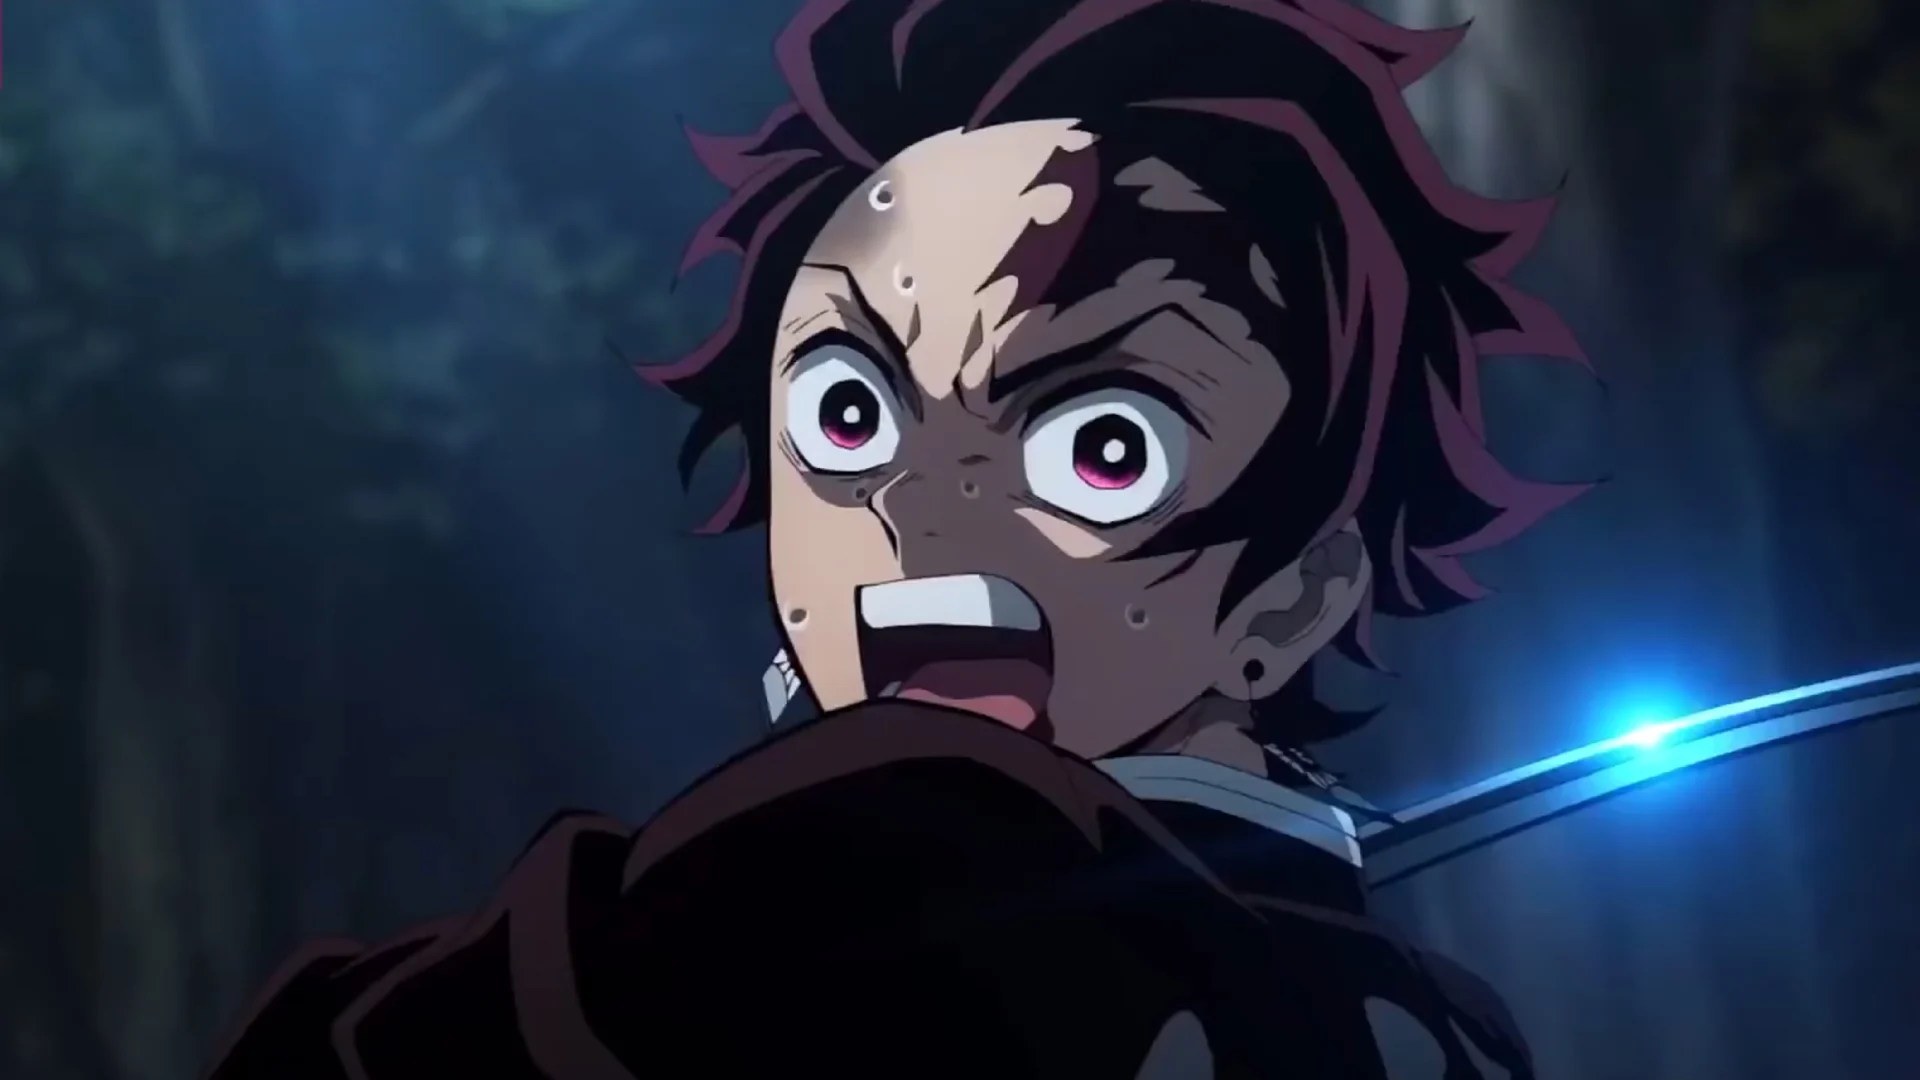 Demon Slayer' Season 3 Gets An Exact Release Date And New English Trailer